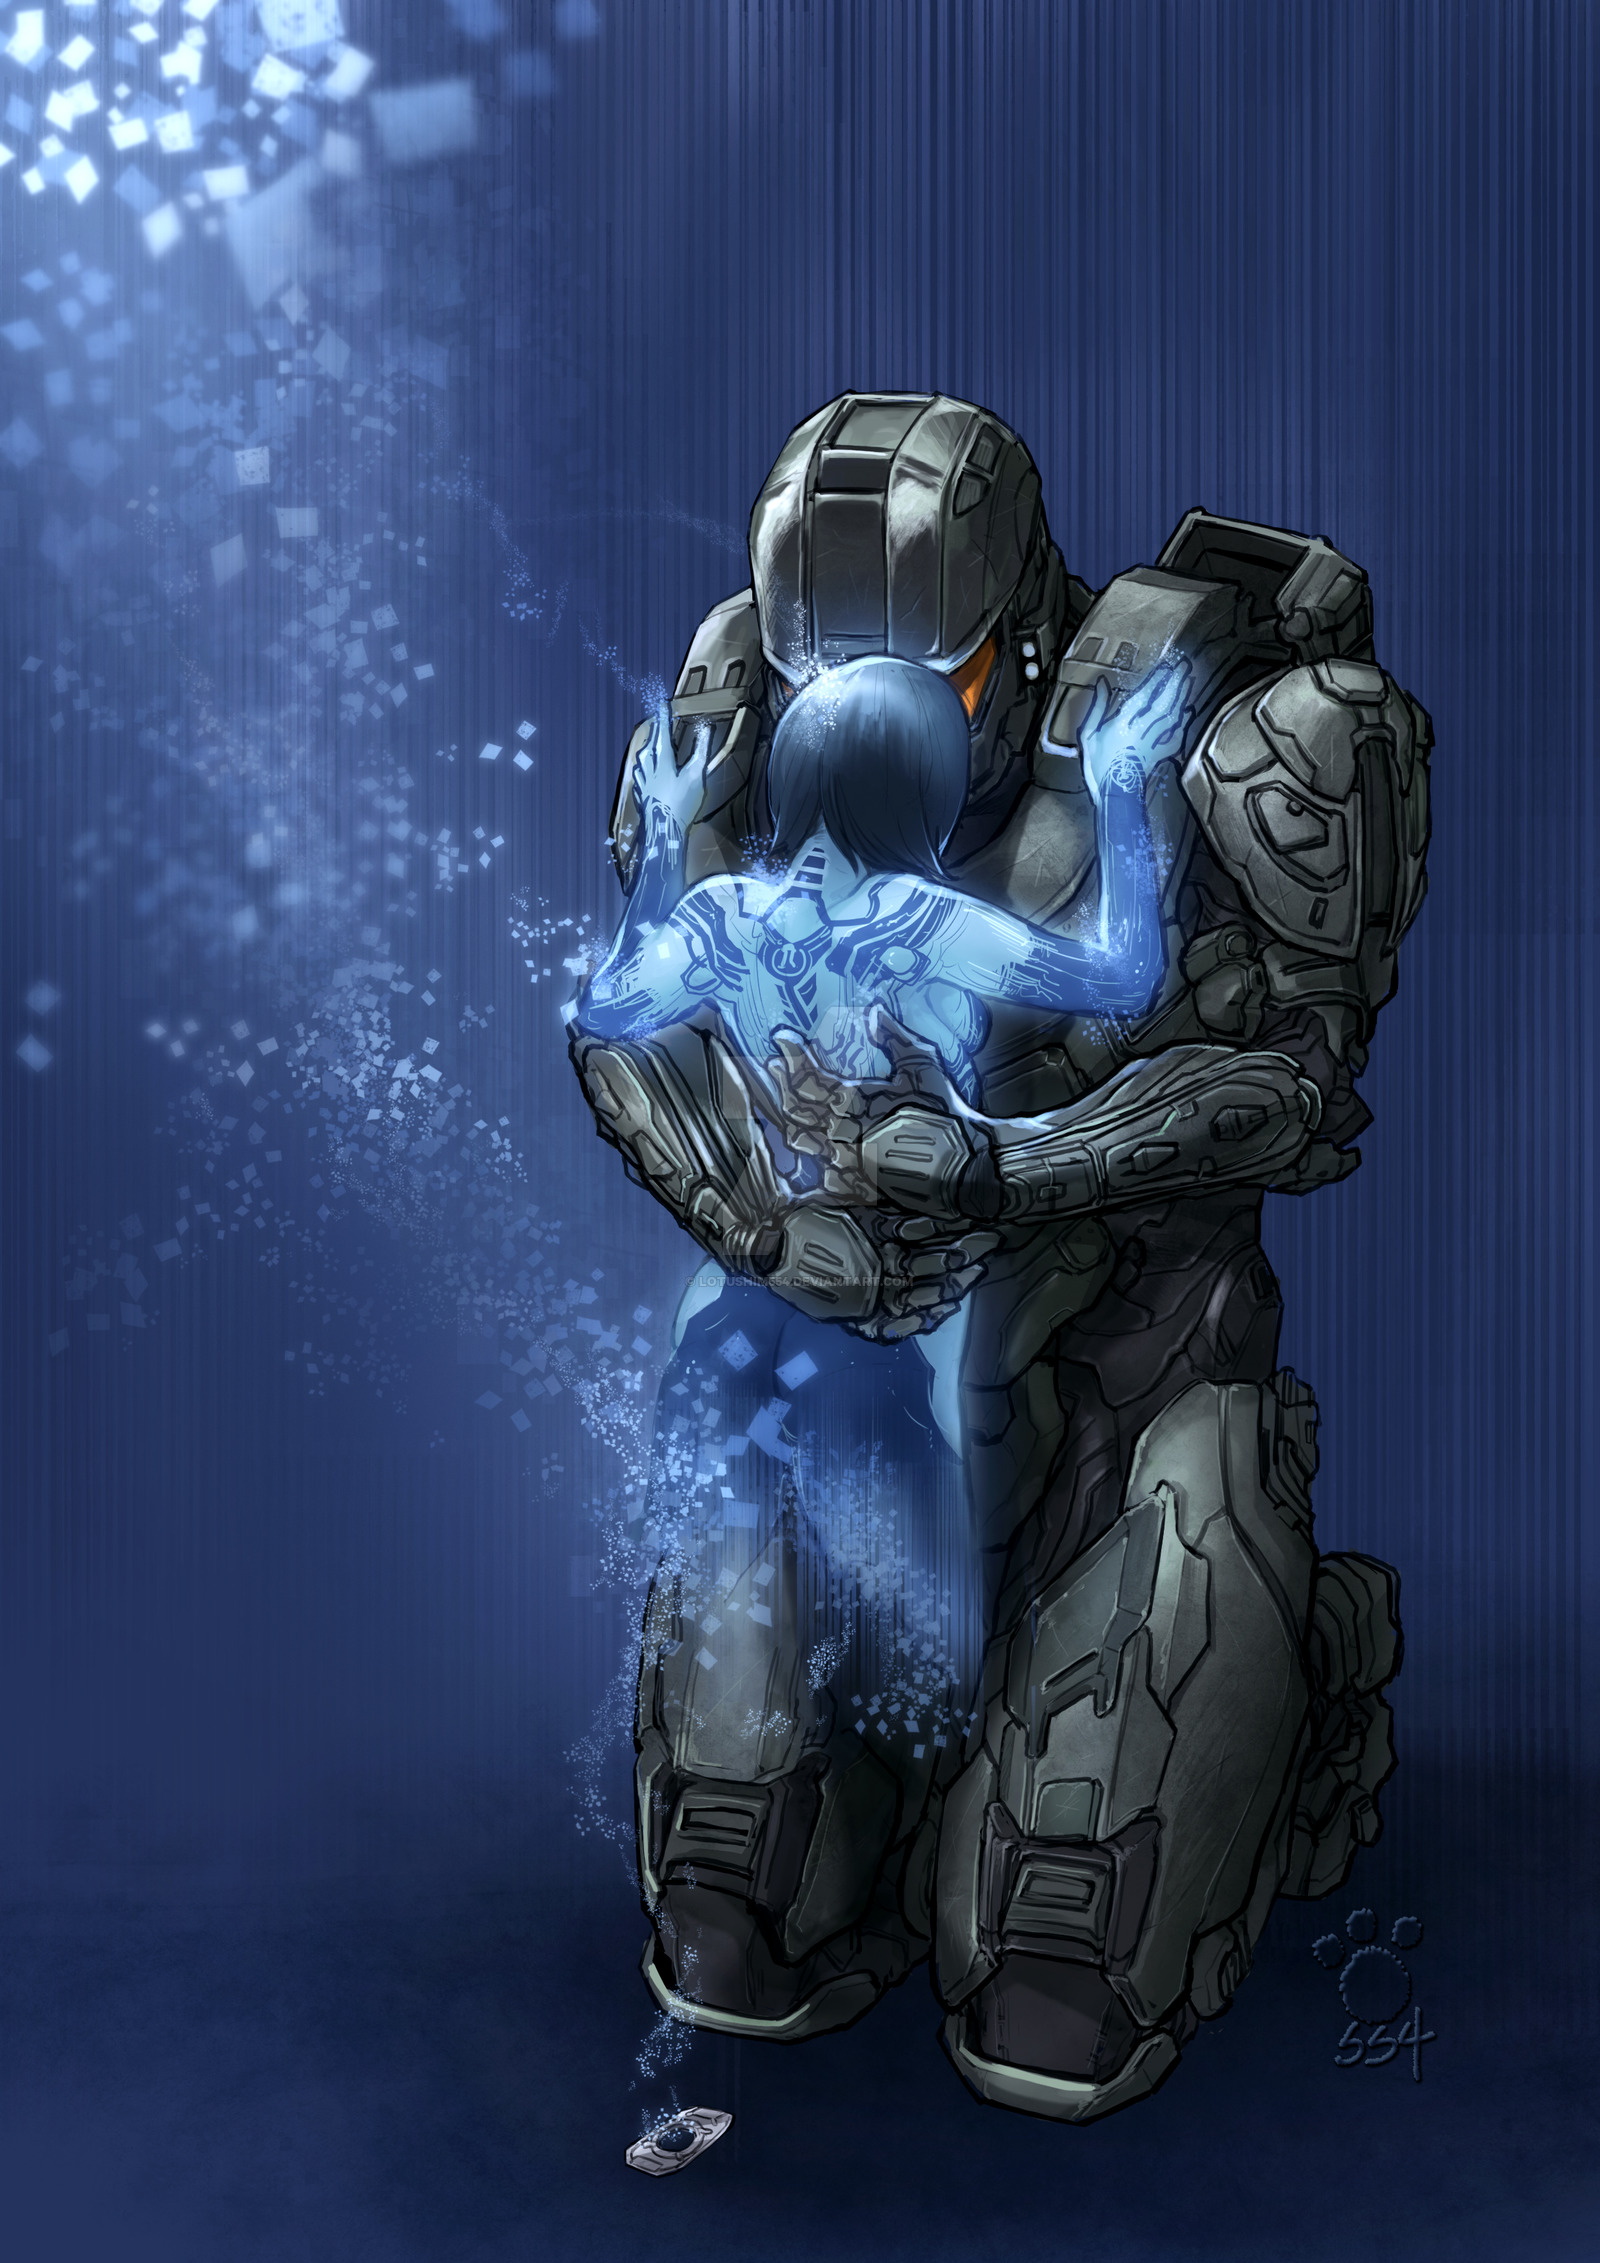 General 1600x2263 Halo (game) Halo 4 video games video game art Spartan II short hair blue hair blue skin fantasy armor soldier 343 Industries hugging portrait display fan art 2D Spartans (Halo) DeviantArt science fiction Master Chief (Halo) Cortana (Halo) video game characters